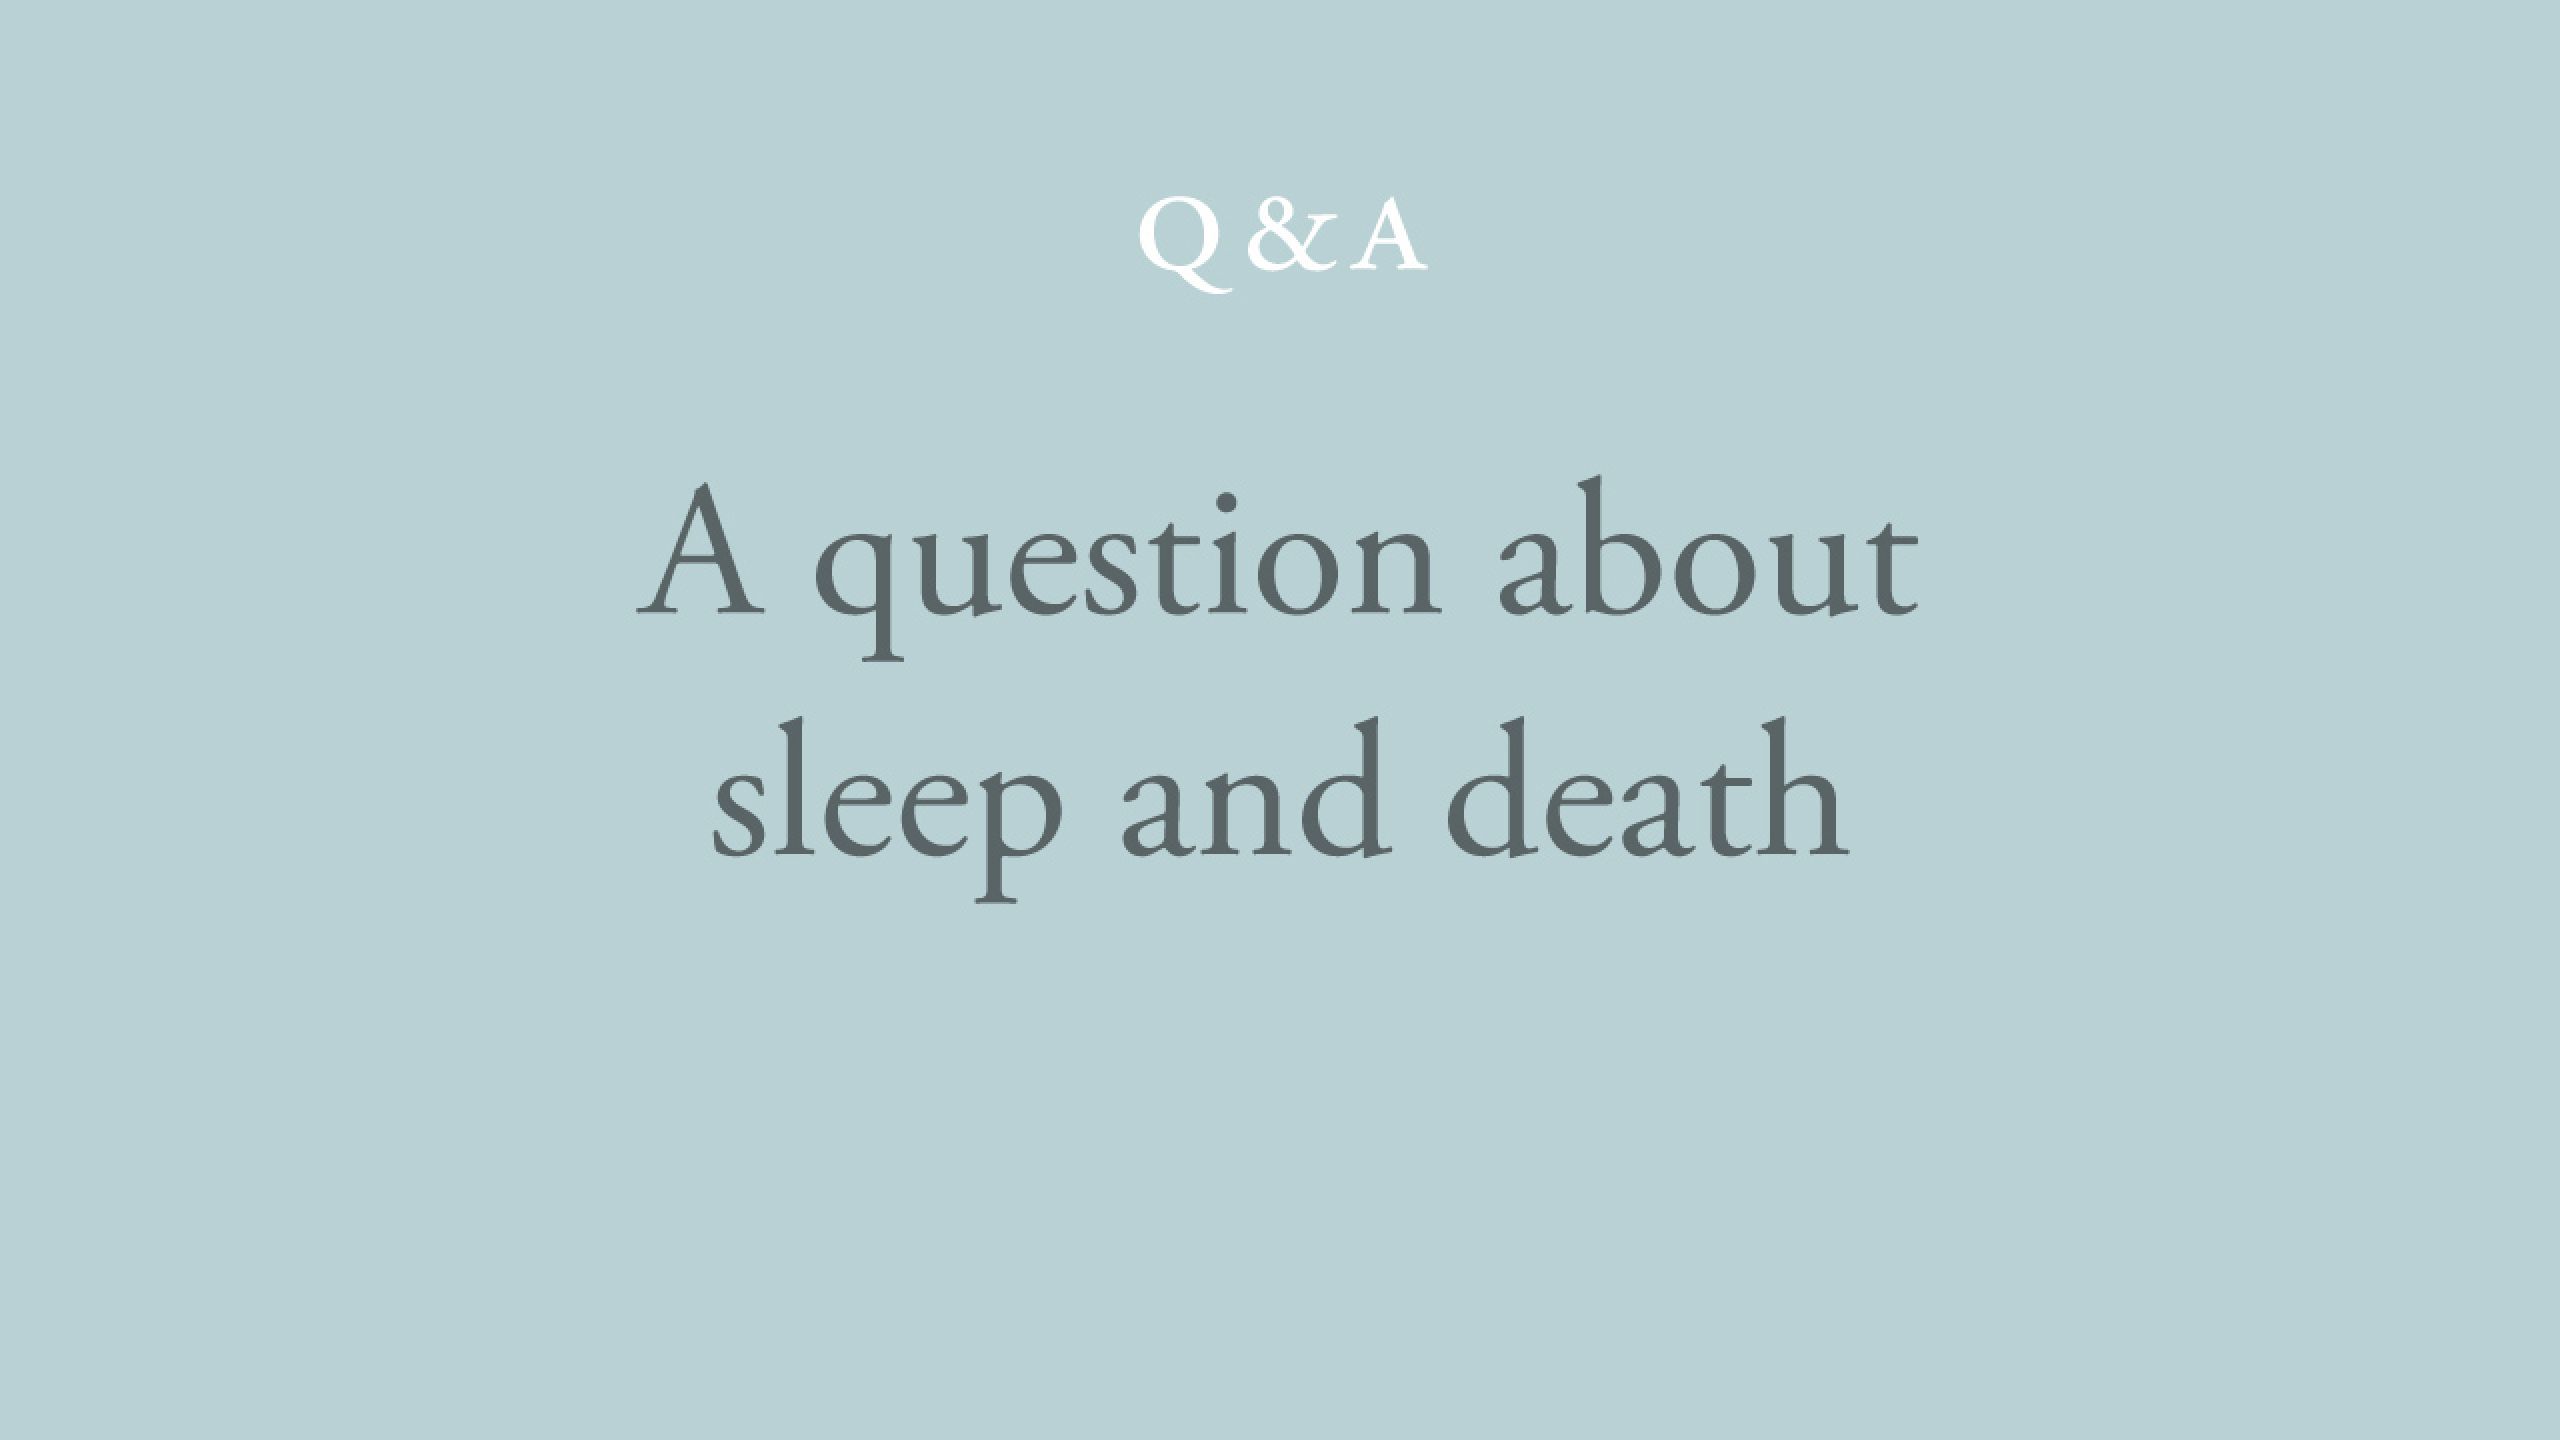 What is the difference between deep sleep and death?